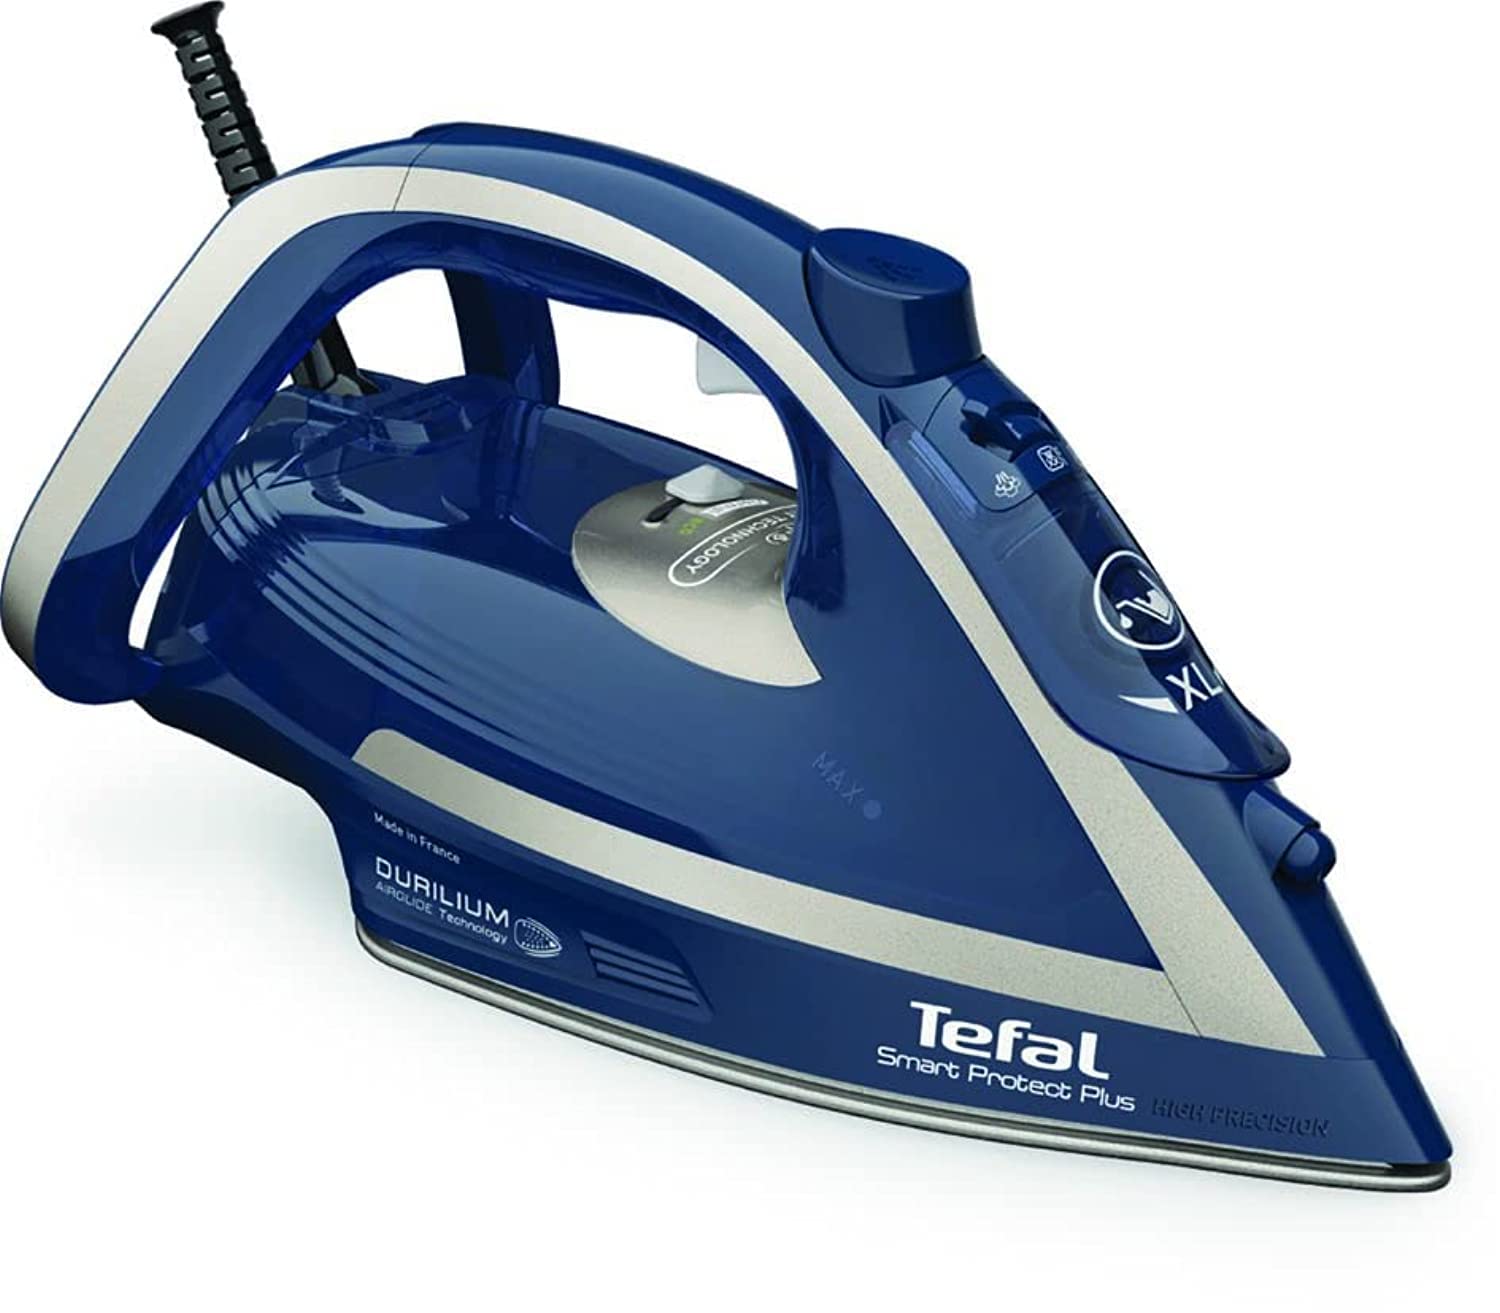 TEFAL Smart Protect+ Steam Iron, 270 ml, 2800 Watts, Durilium Airglide Soleplate Technology, Blue & Silver, FV6872M0, 1 year warranty